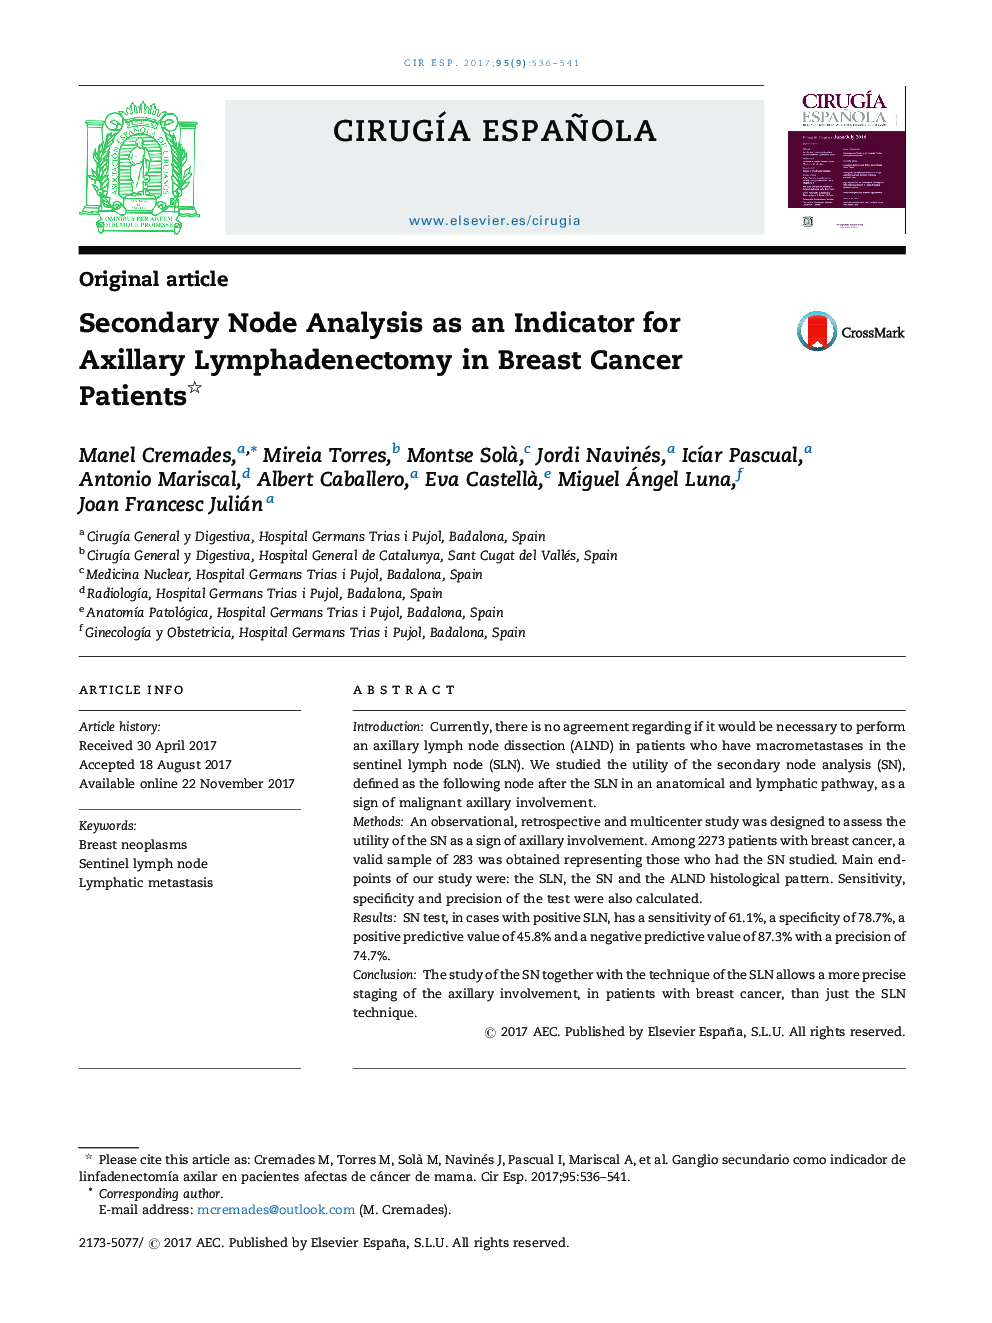 Secondary Node Analysis as an Indicator for Axillary Lymphadenectomy in Breast Cancer Patients